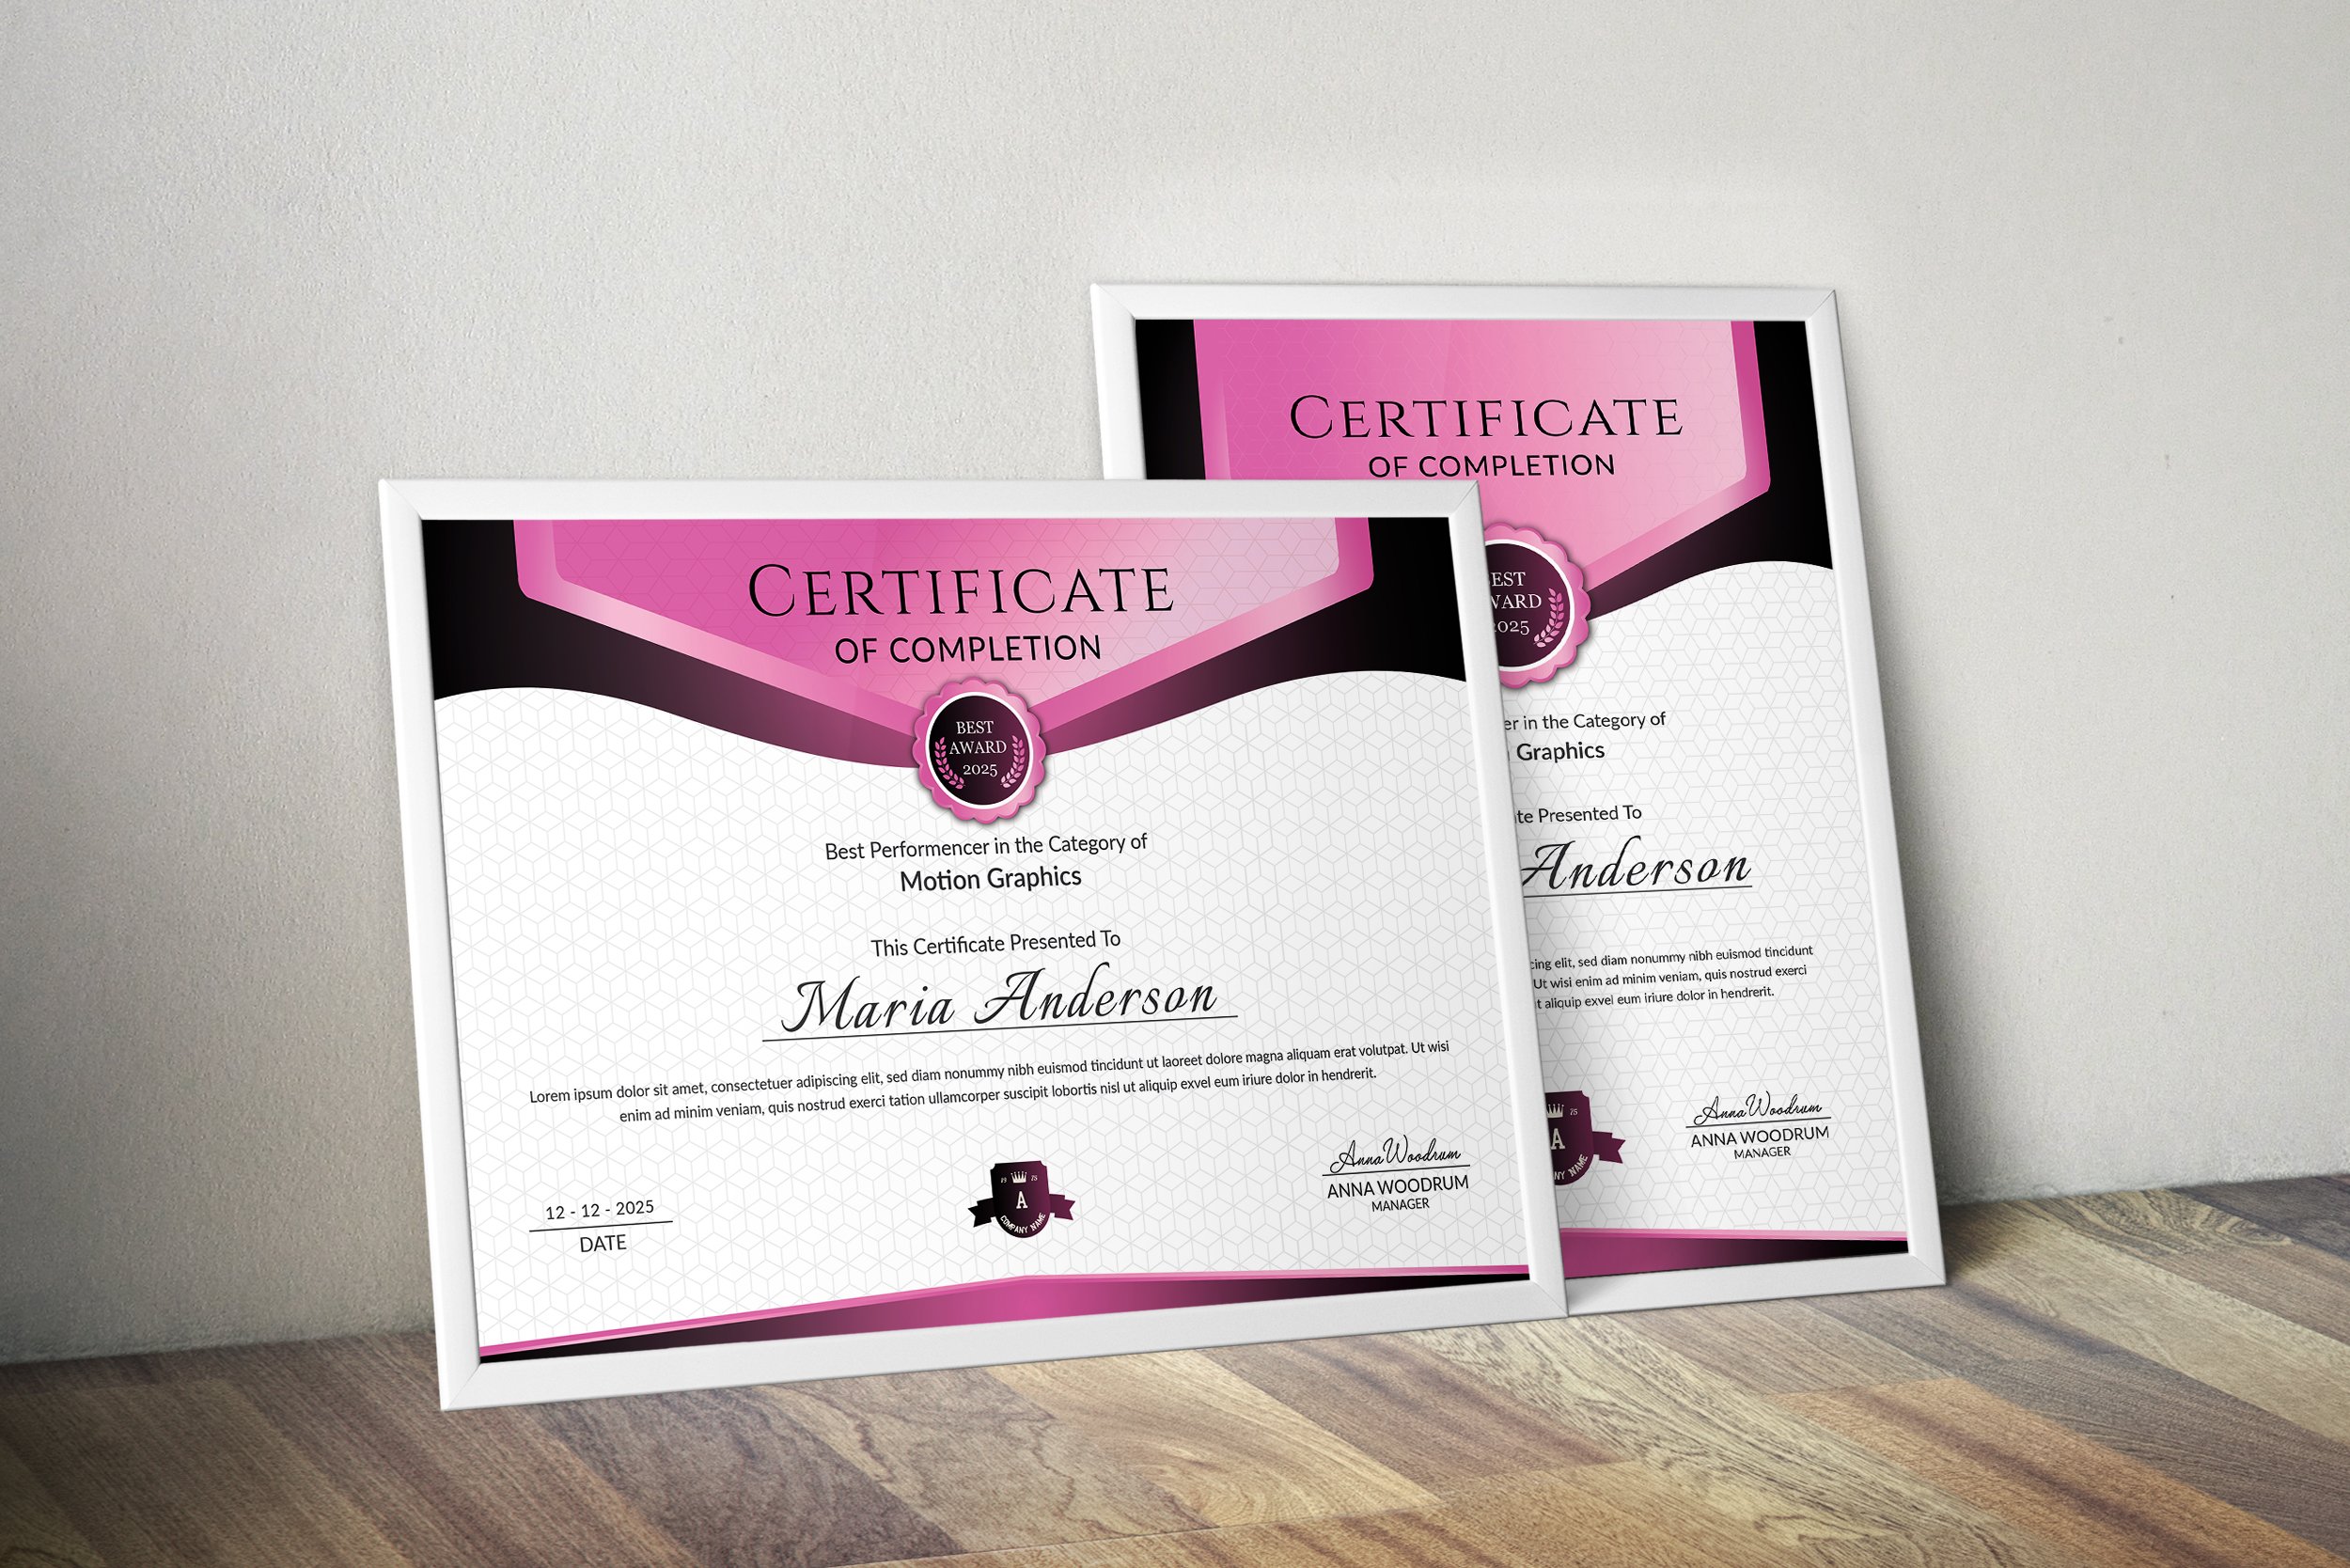 Certificate of Completion Template preview image.